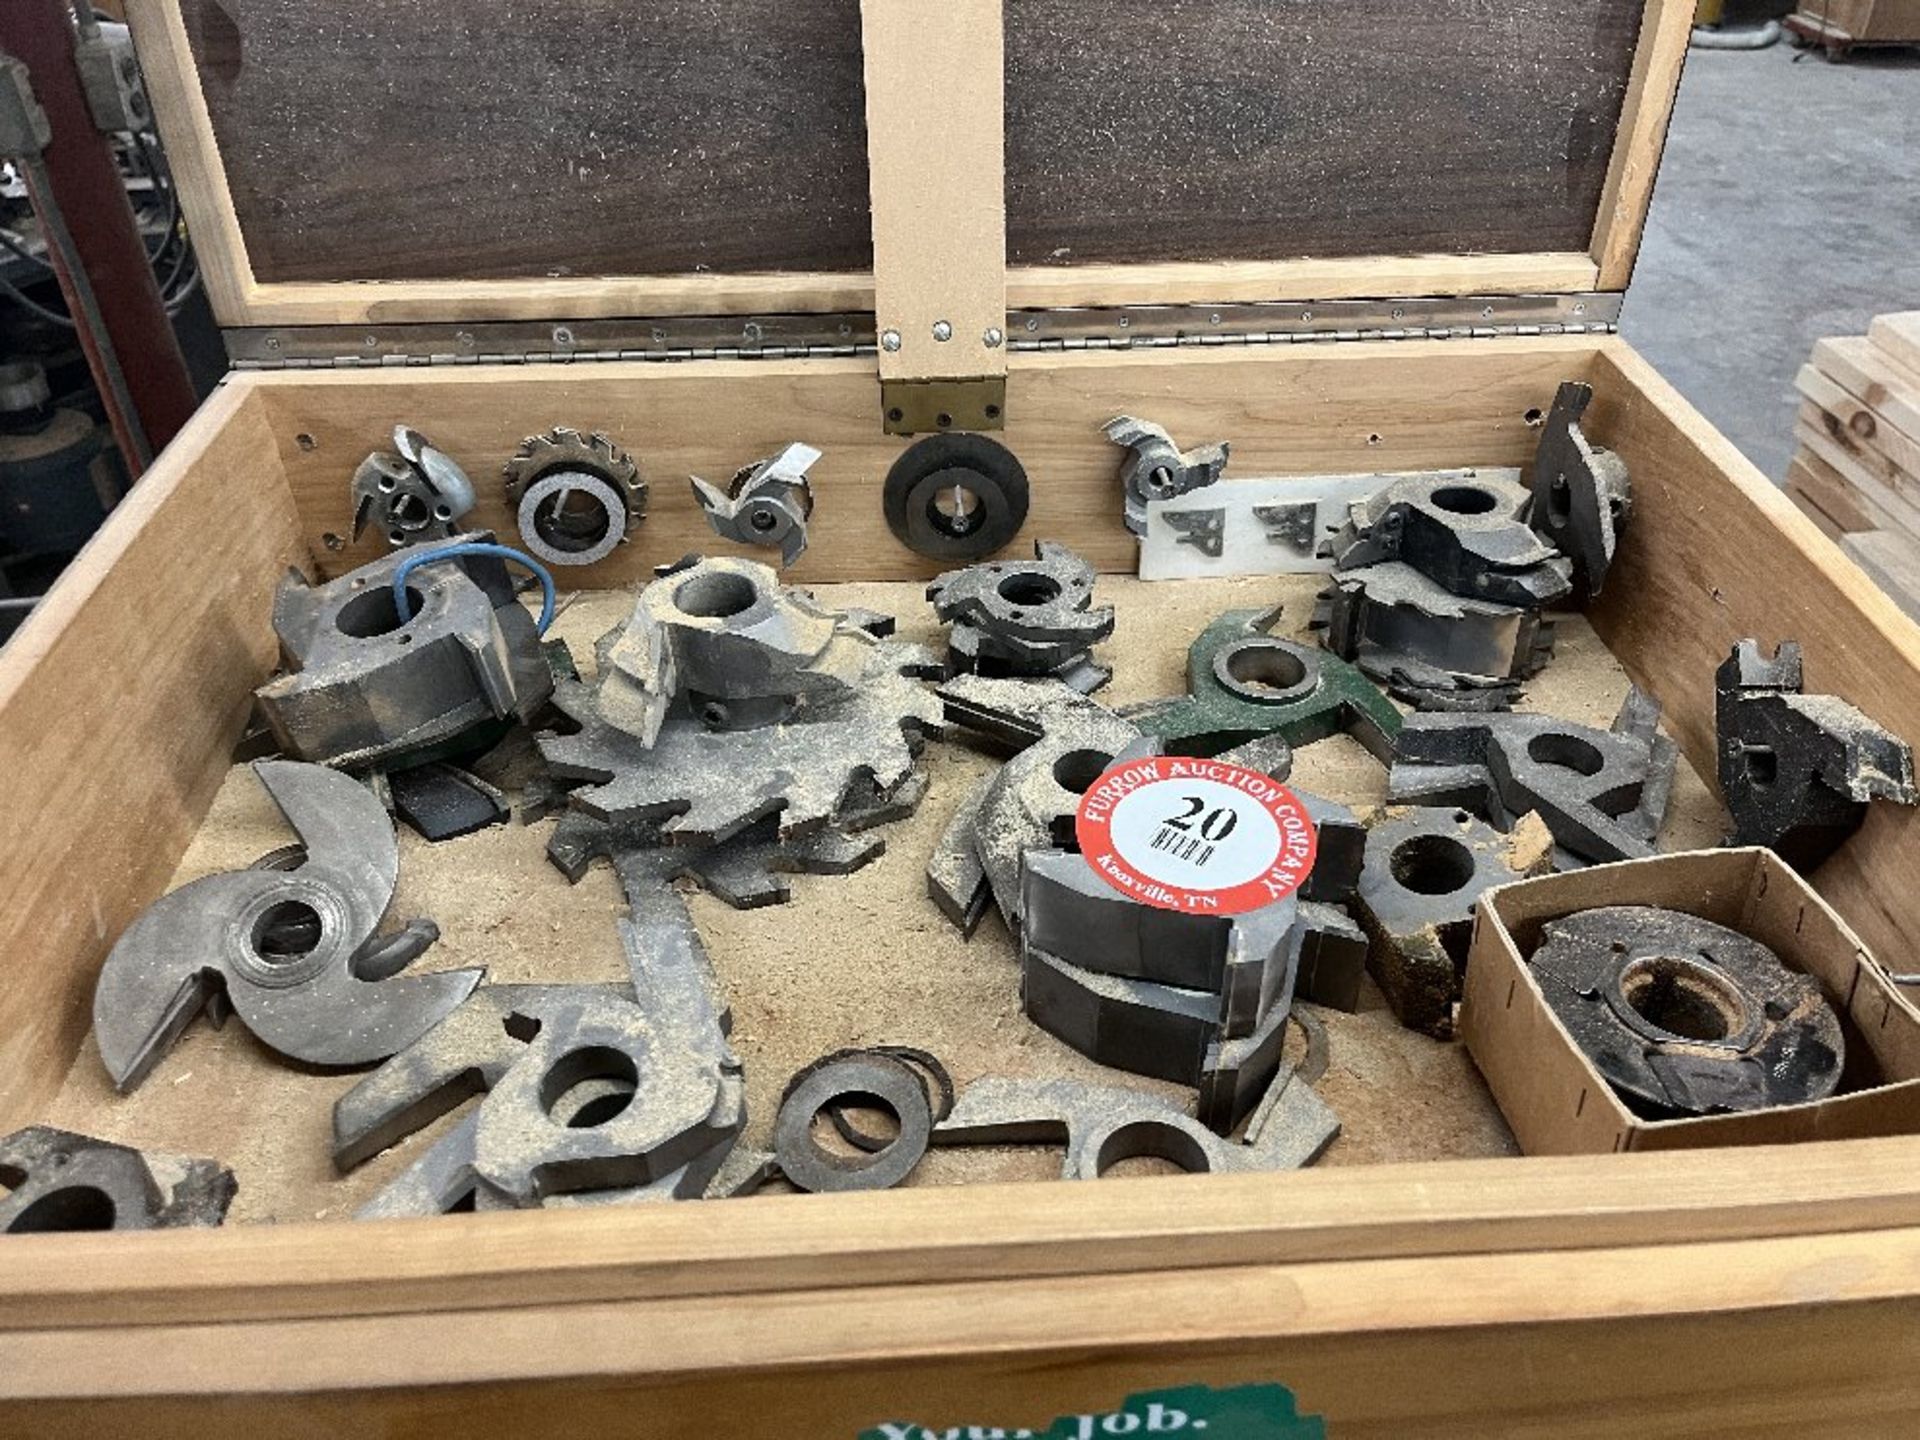 Assorted Shaper Tooling, Mostly Raised Panel Cutters